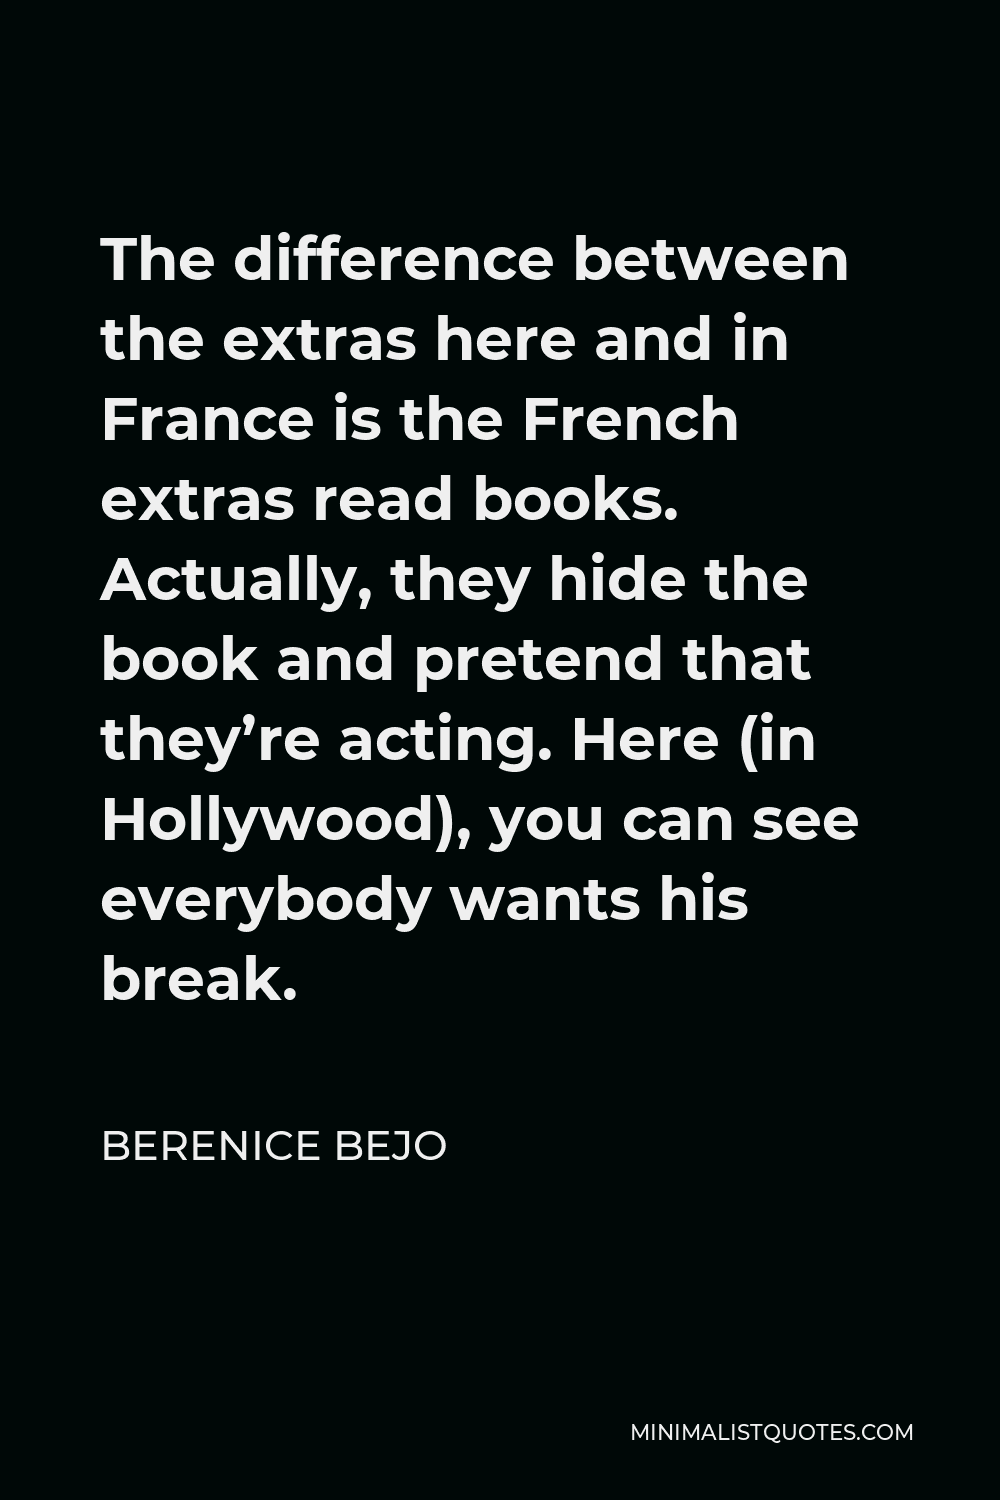 Berenice Bejo Quote - The difference between the extras here and in France is the French extras read books. Actually, they hide the book and pretend that they’re acting. Here (in Hollywood), you can see everybody wants his break.